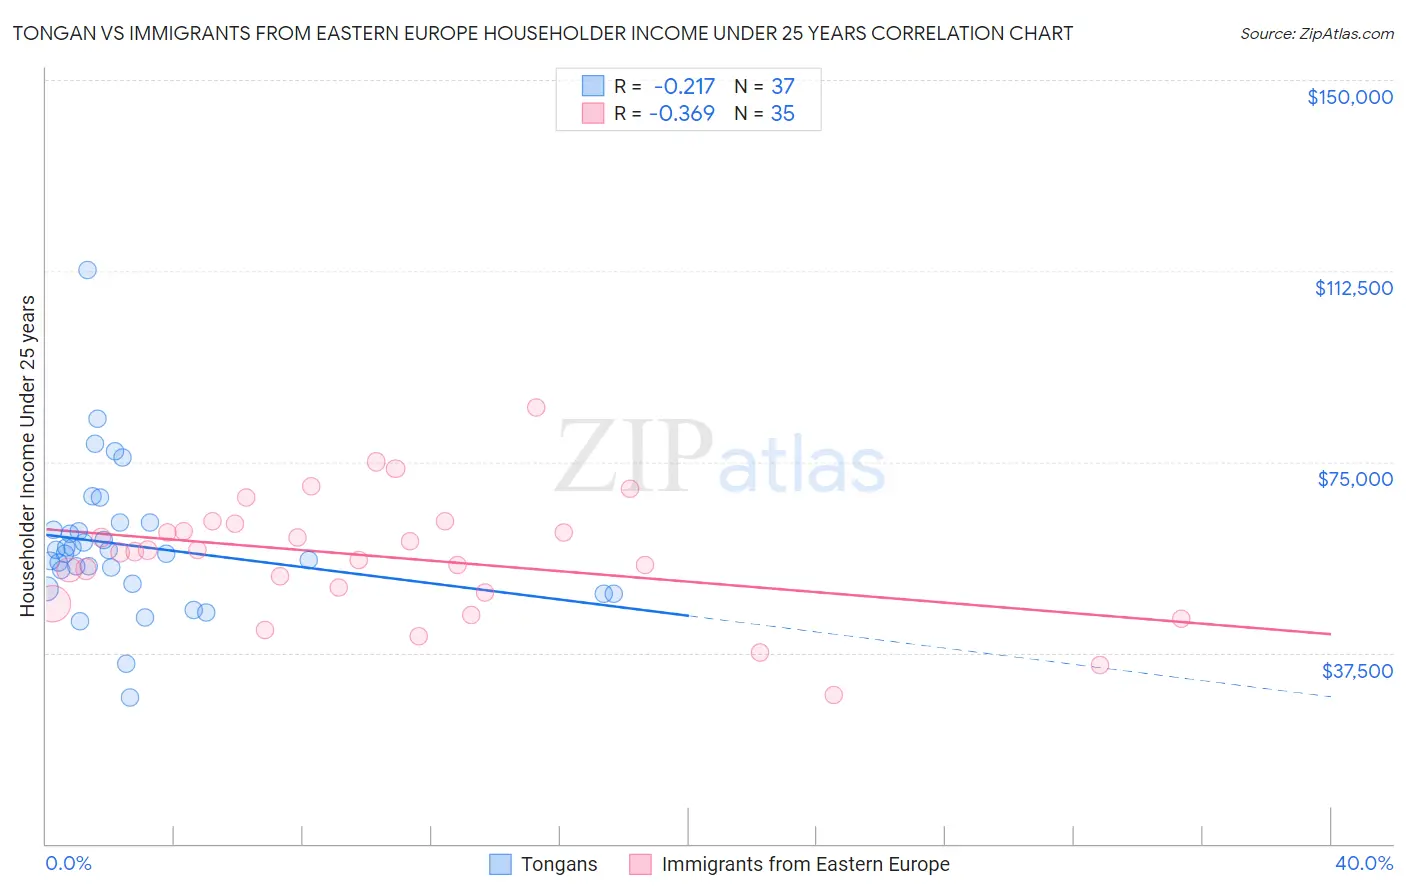 Tongan vs Immigrants from Eastern Europe Householder Income Under 25 years